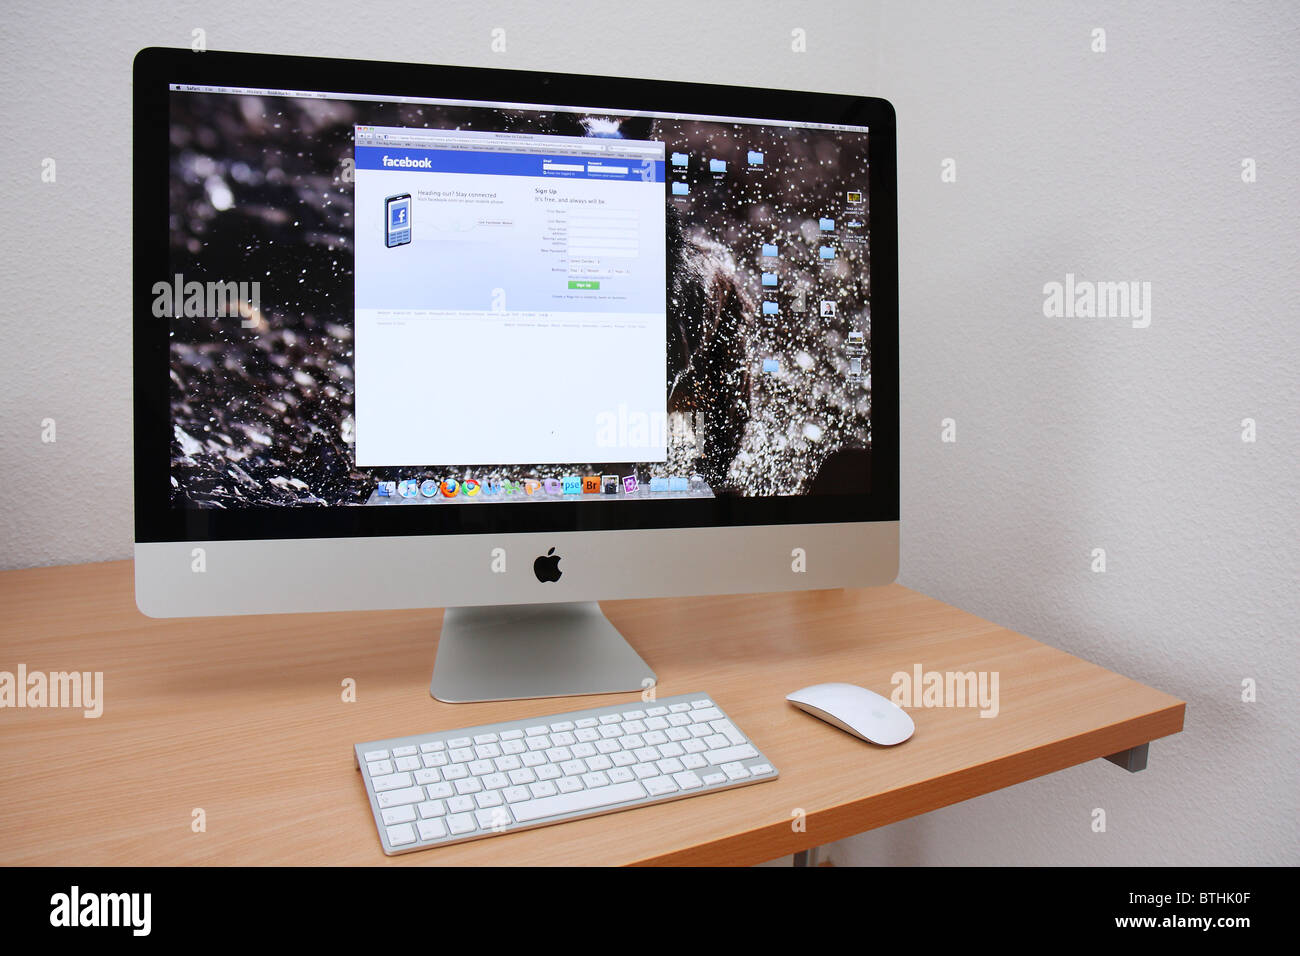 Desk In Personal Study With 27 Apple Imac With Facebook Website